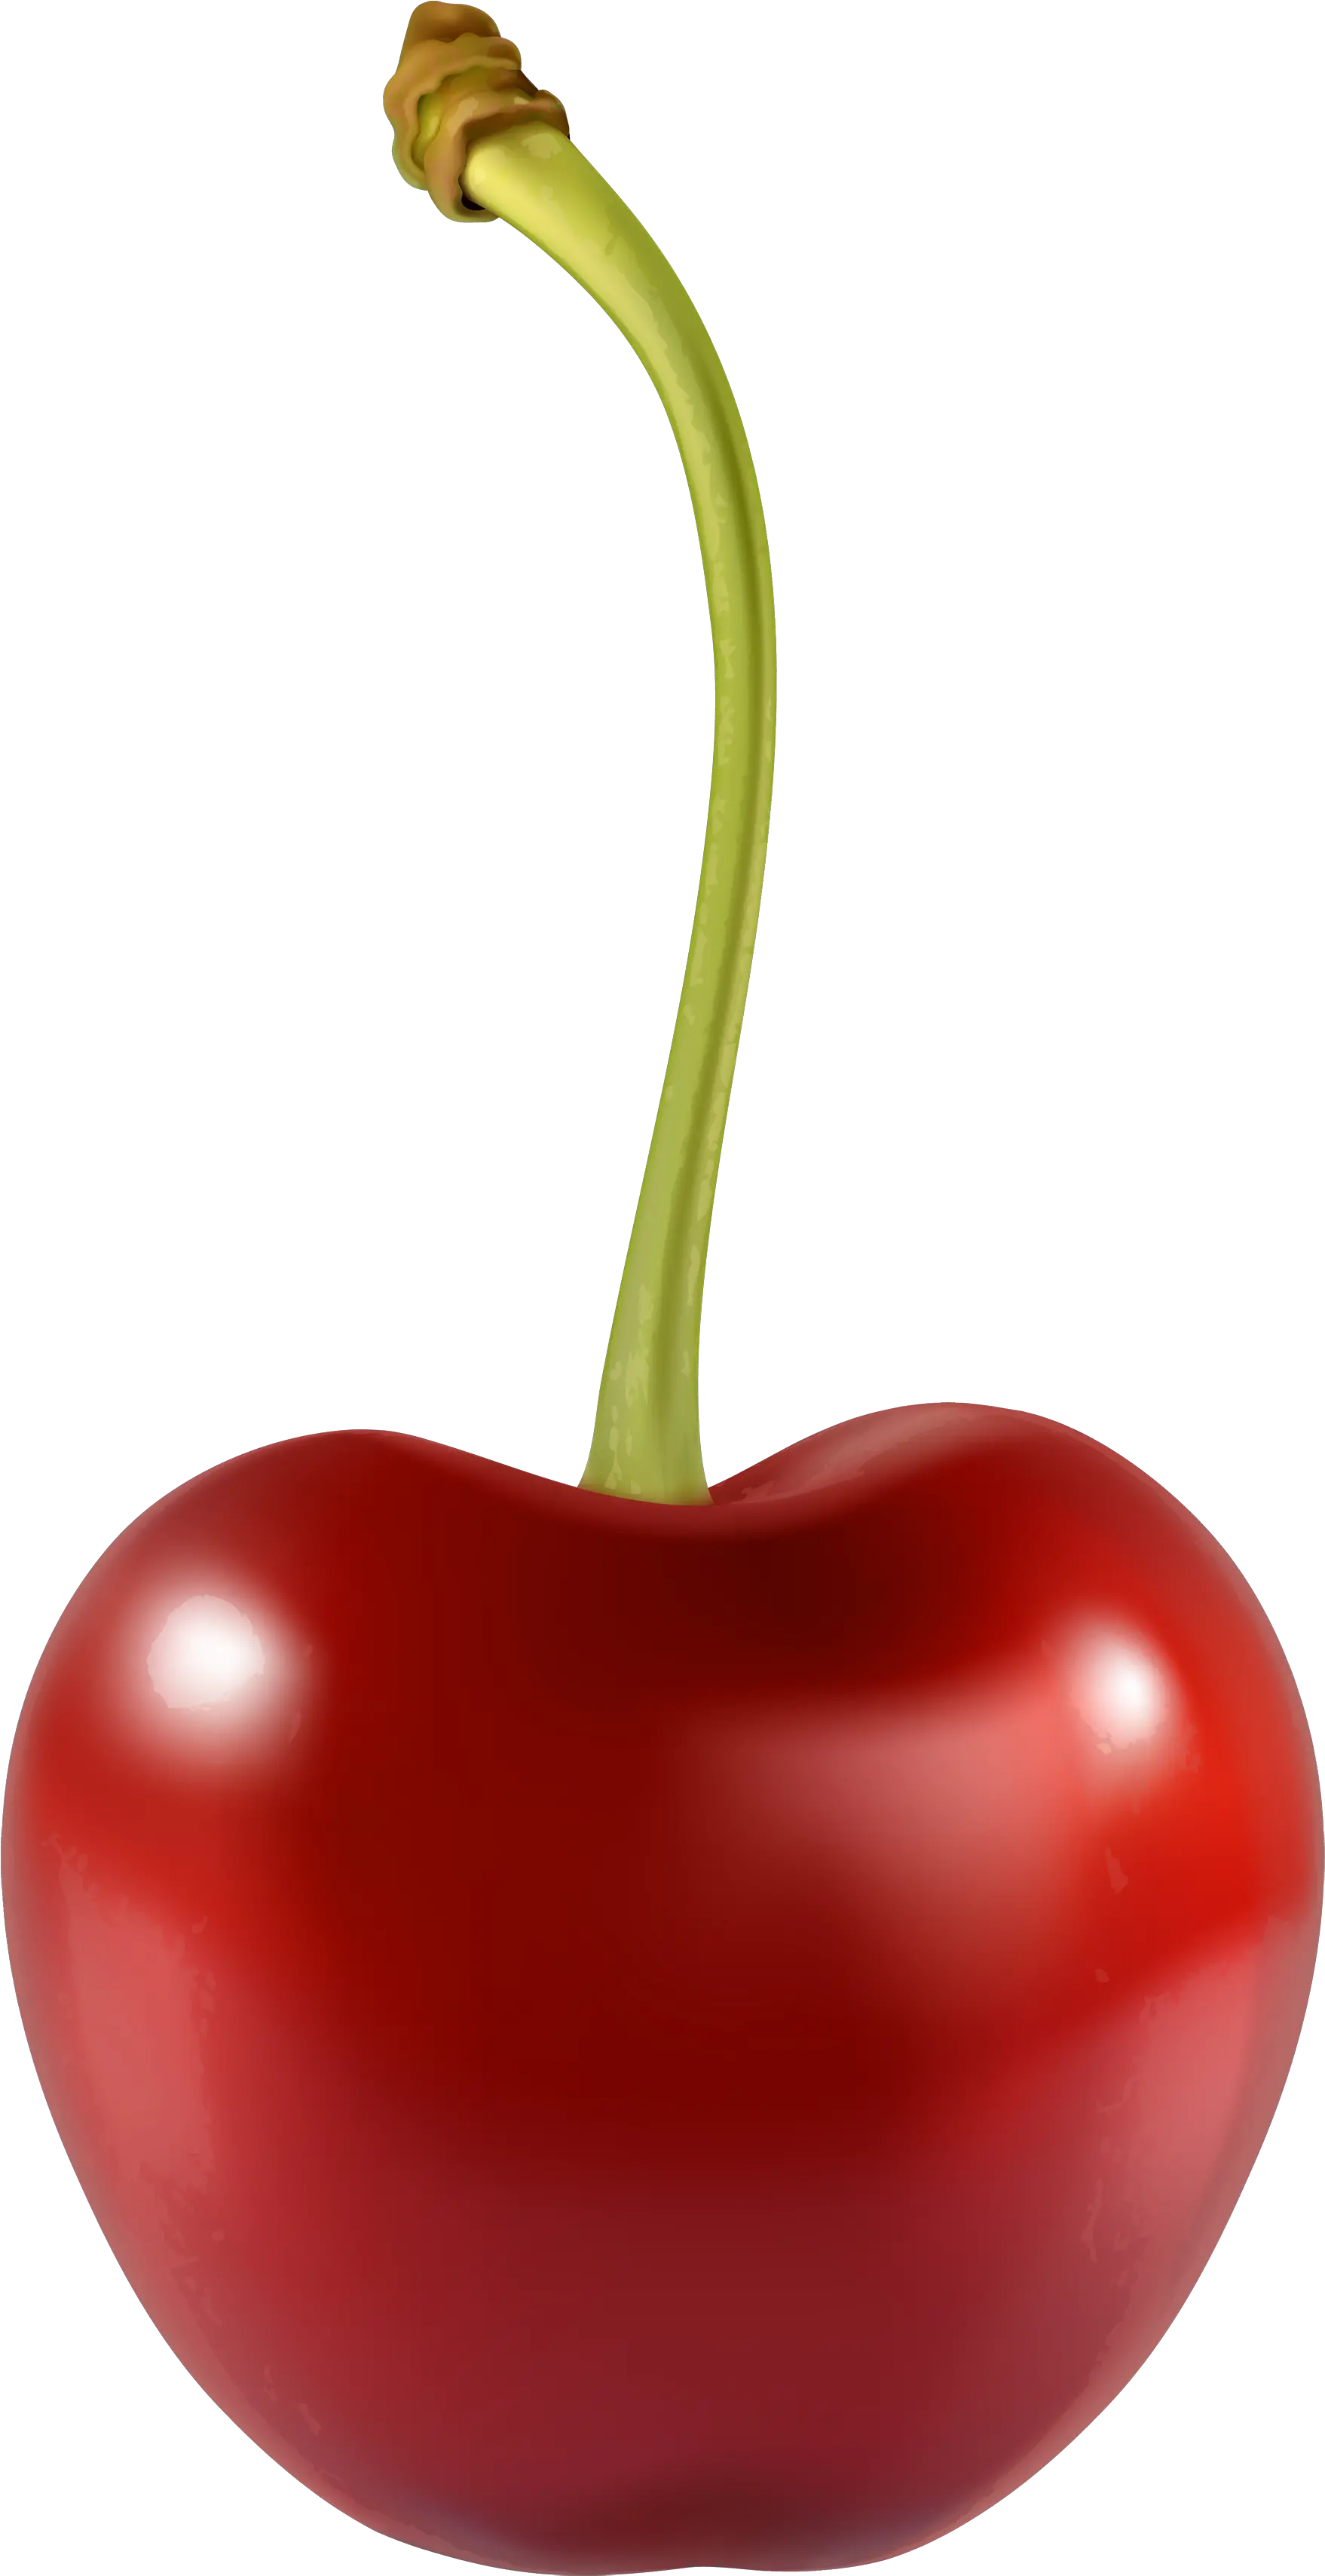 Cherry Transparent Png Clipart Free 1 Cherry Clipart Cherries Png